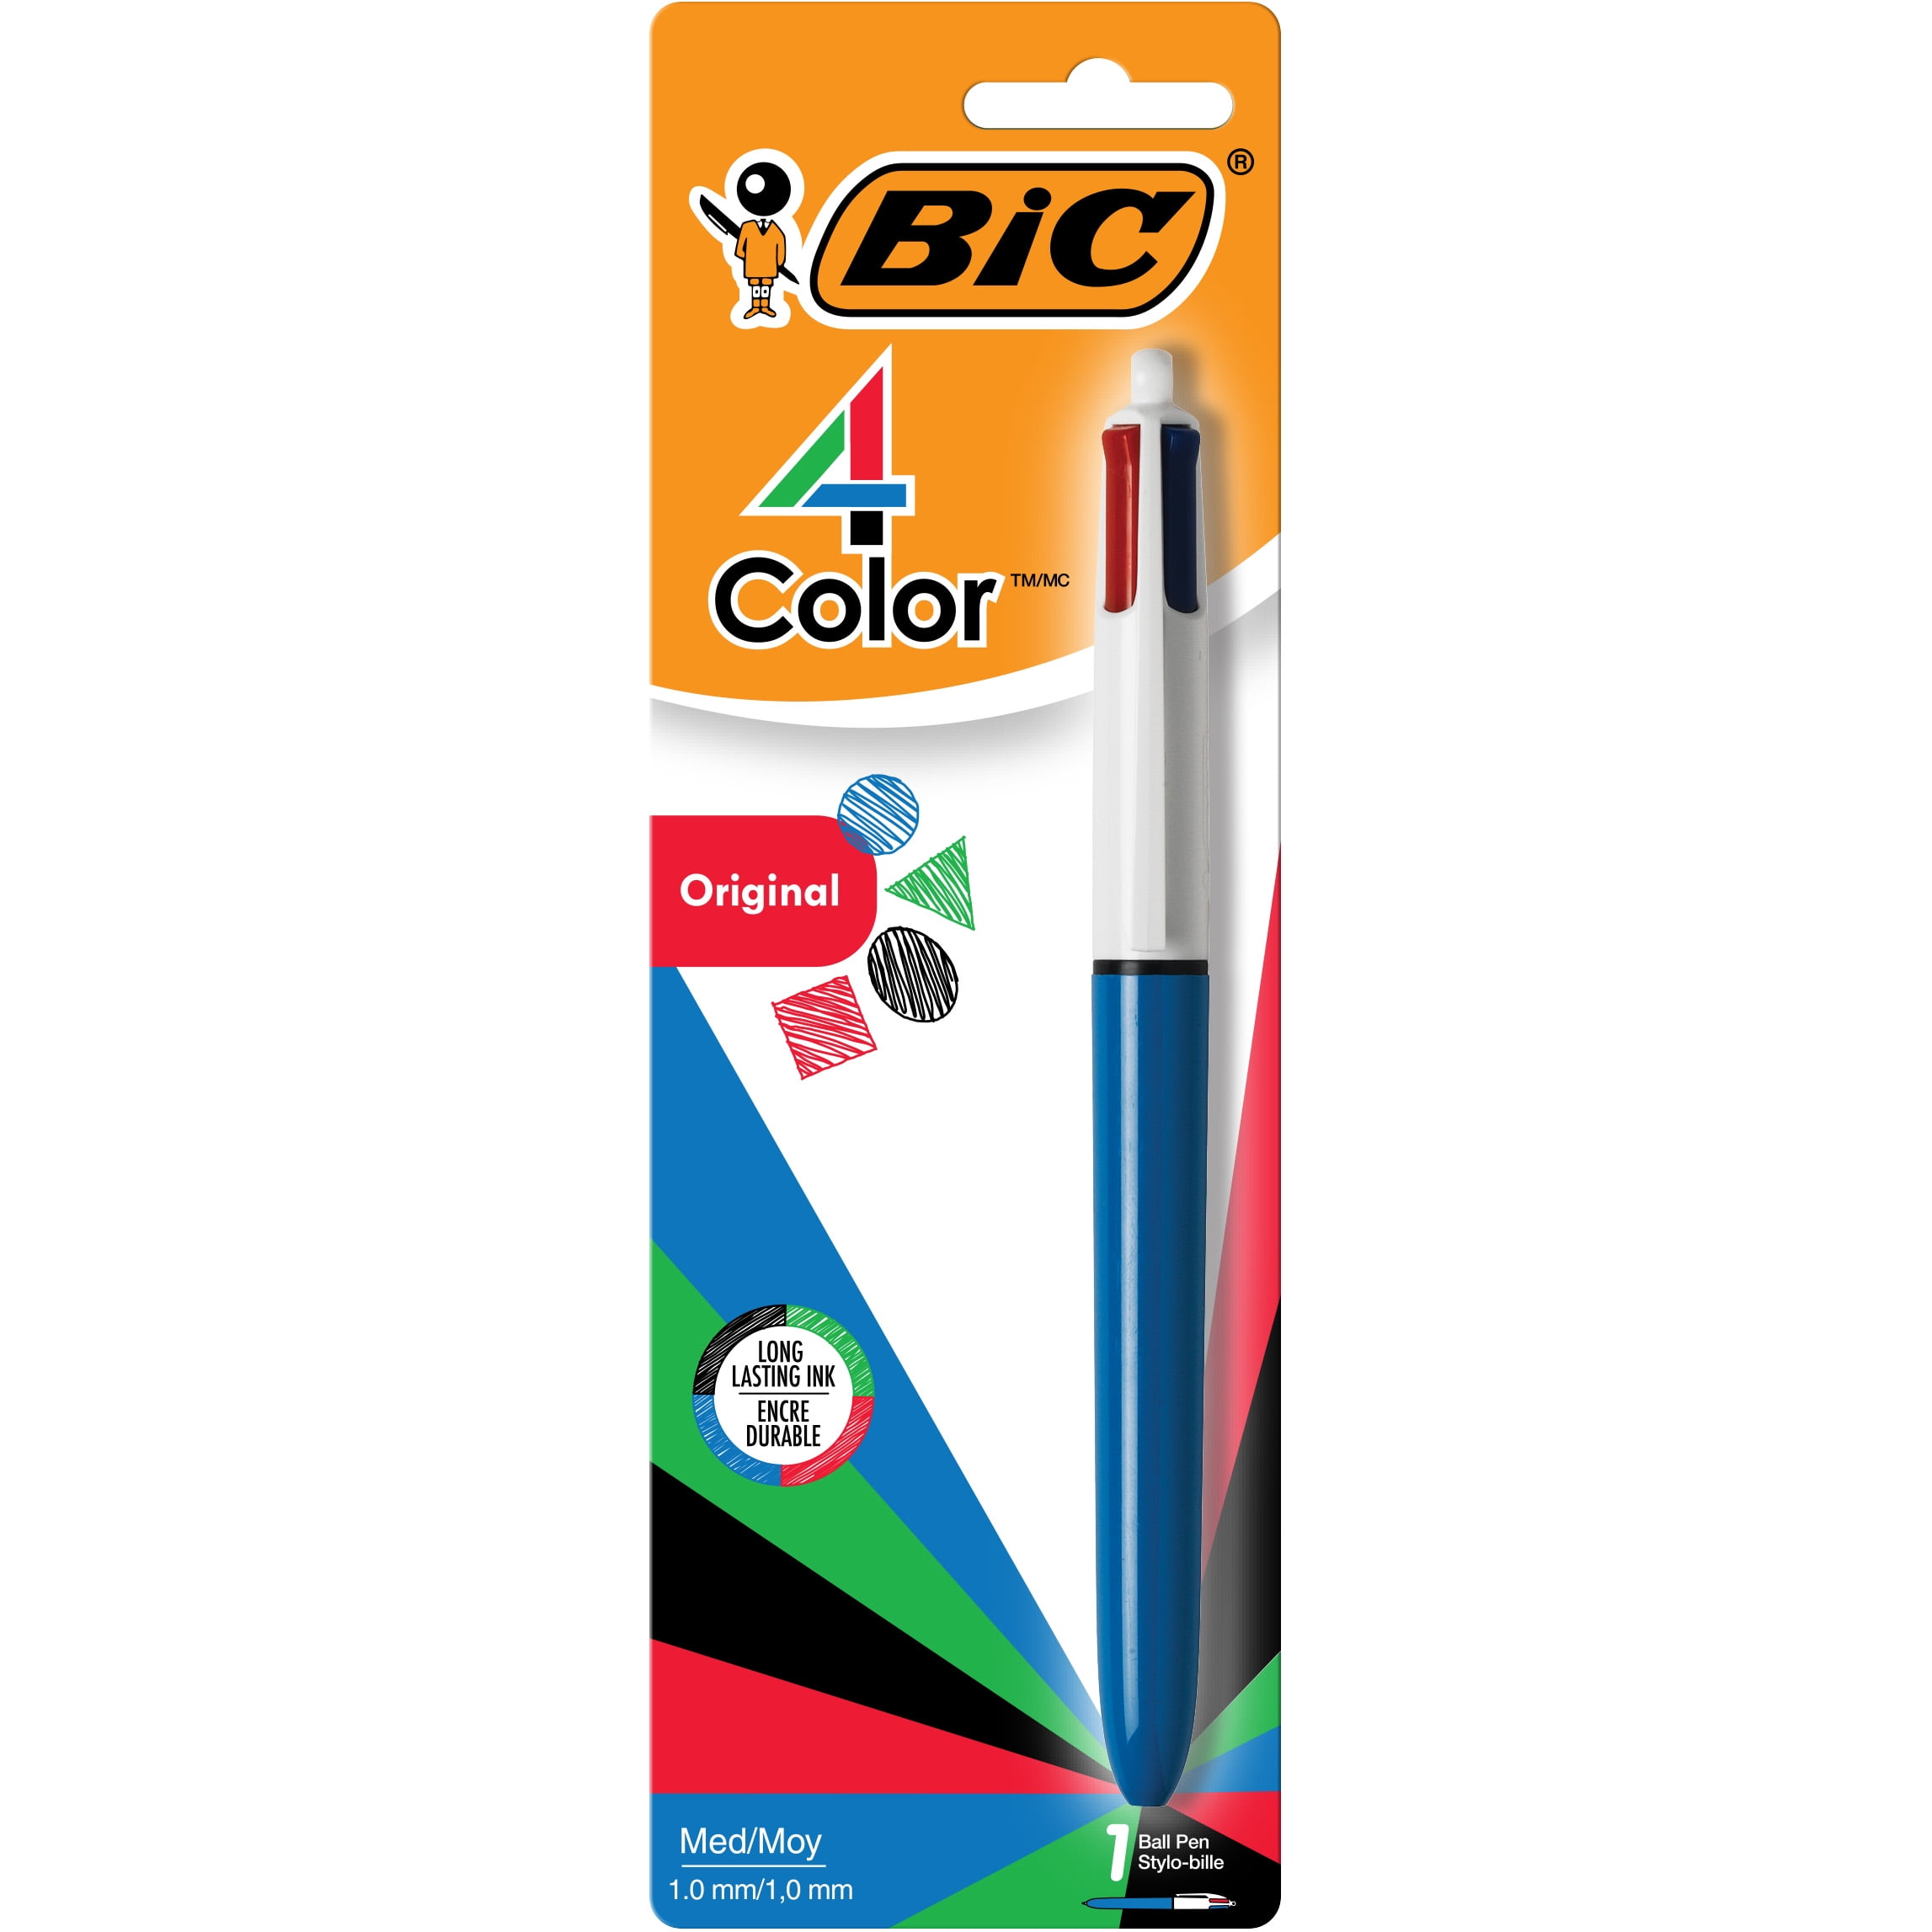 BIC 4-Color Retractable Ball Pen - 50th Birthday Edition, Assorted Colors, 1 Count